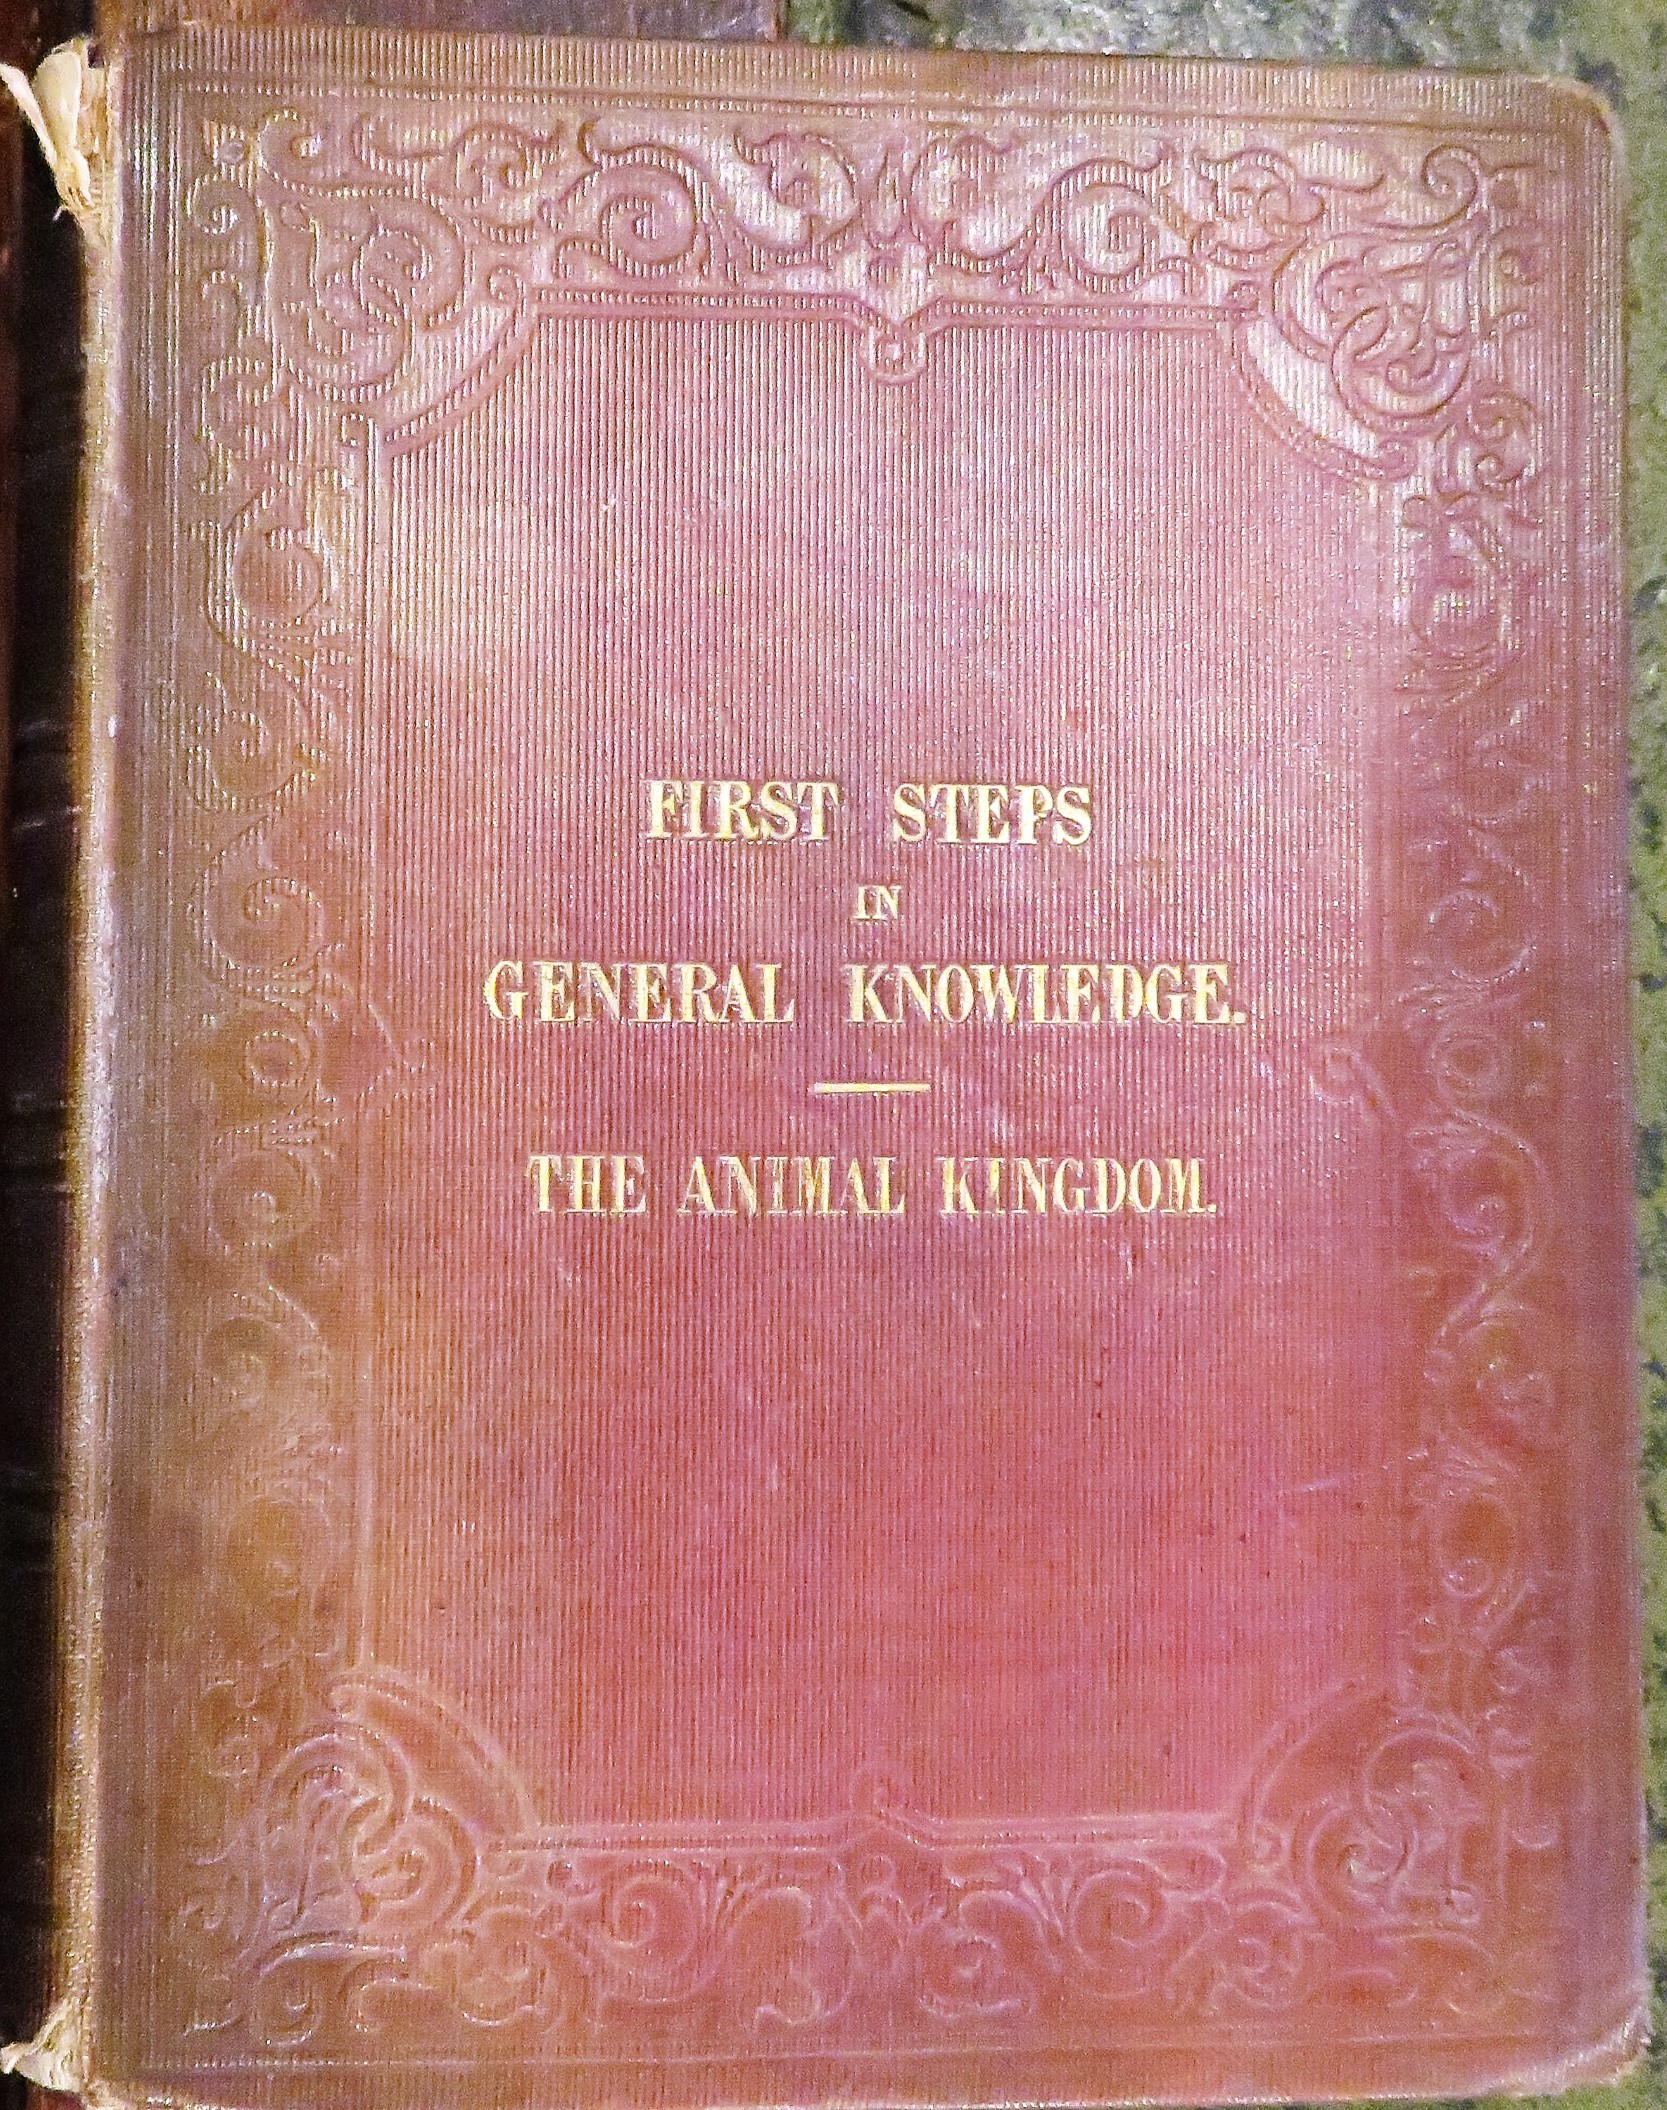 First Steps in General Knowledge Part III The Animal Kingdom